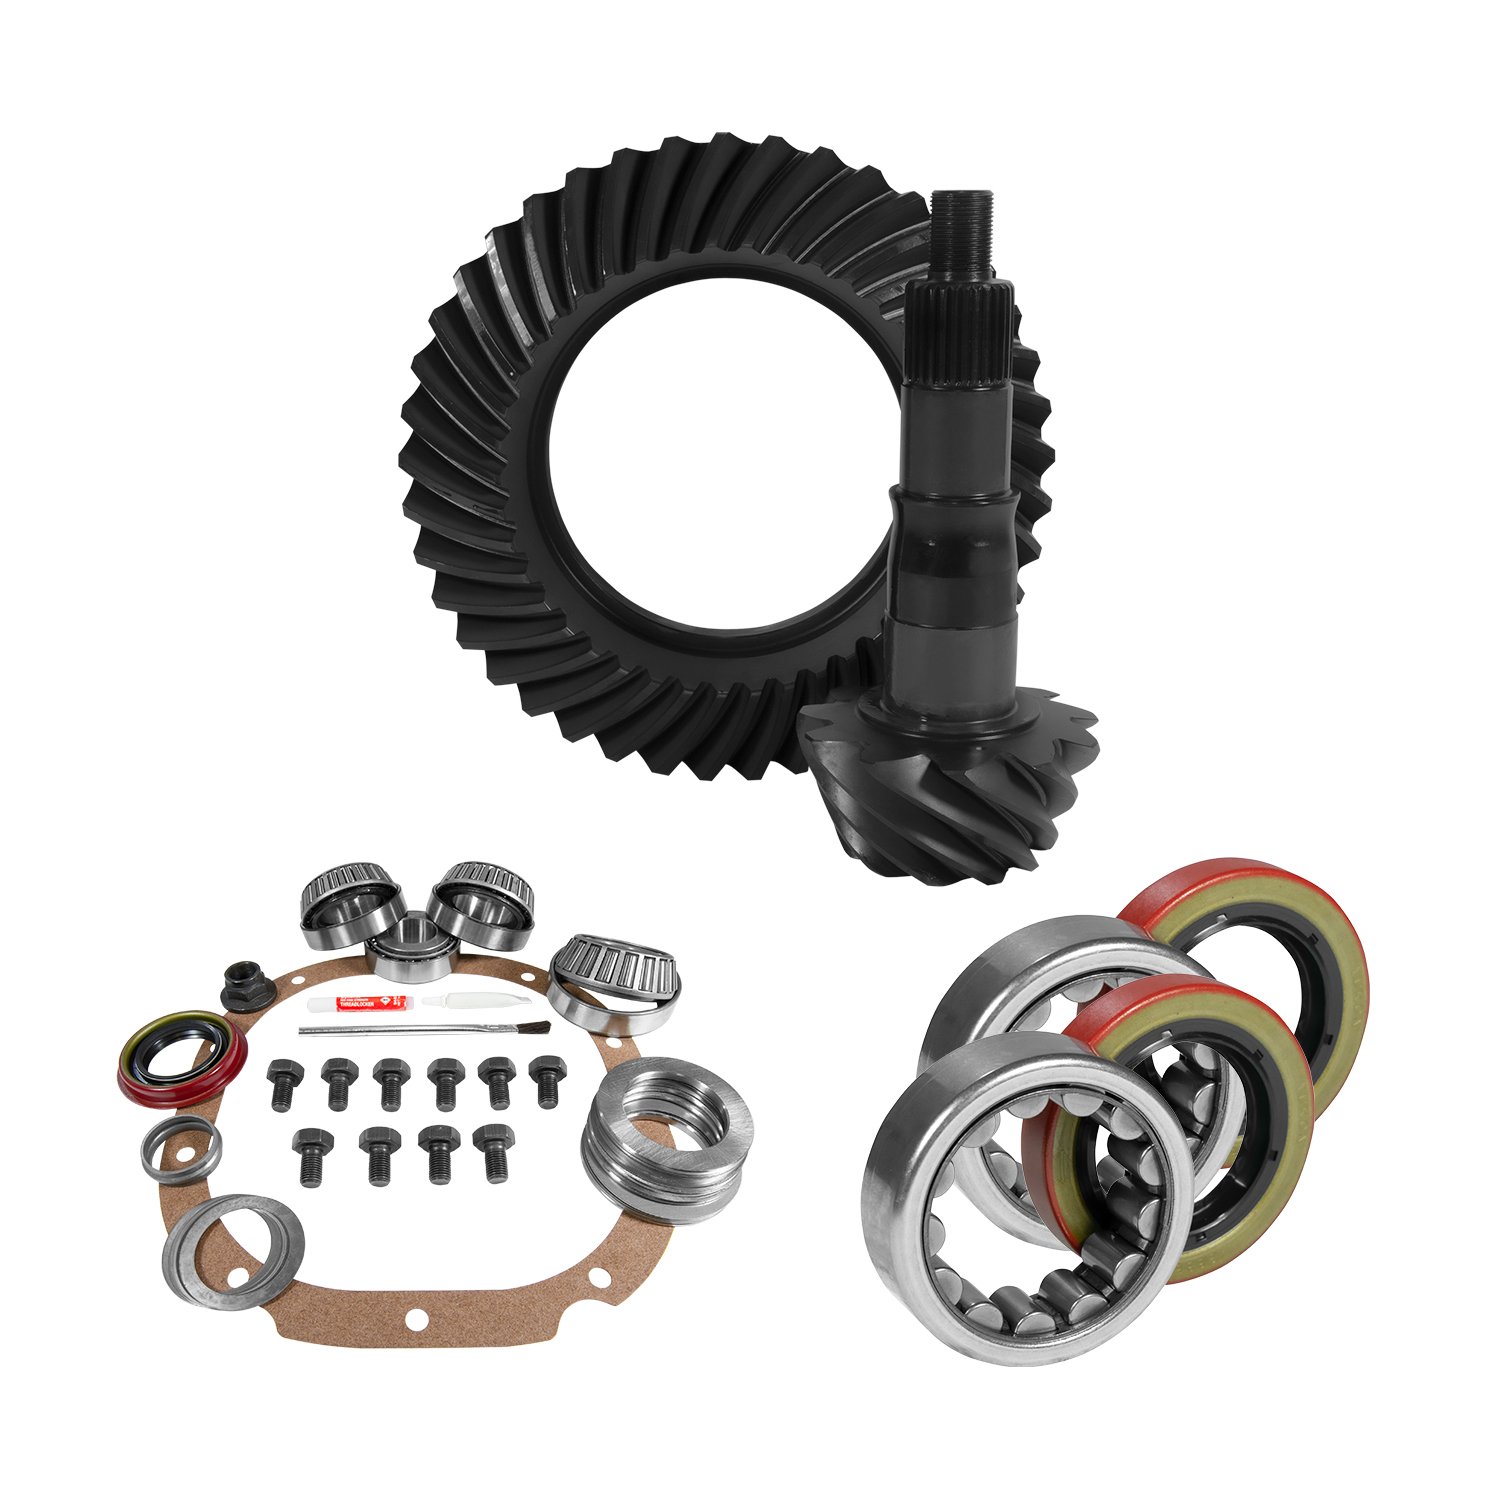 USA Standard 10760 8.8 in. Ford 4.88 Rear Ring & Pinion Install Kit, 2.53 in. Od Axle Bearings & Seals